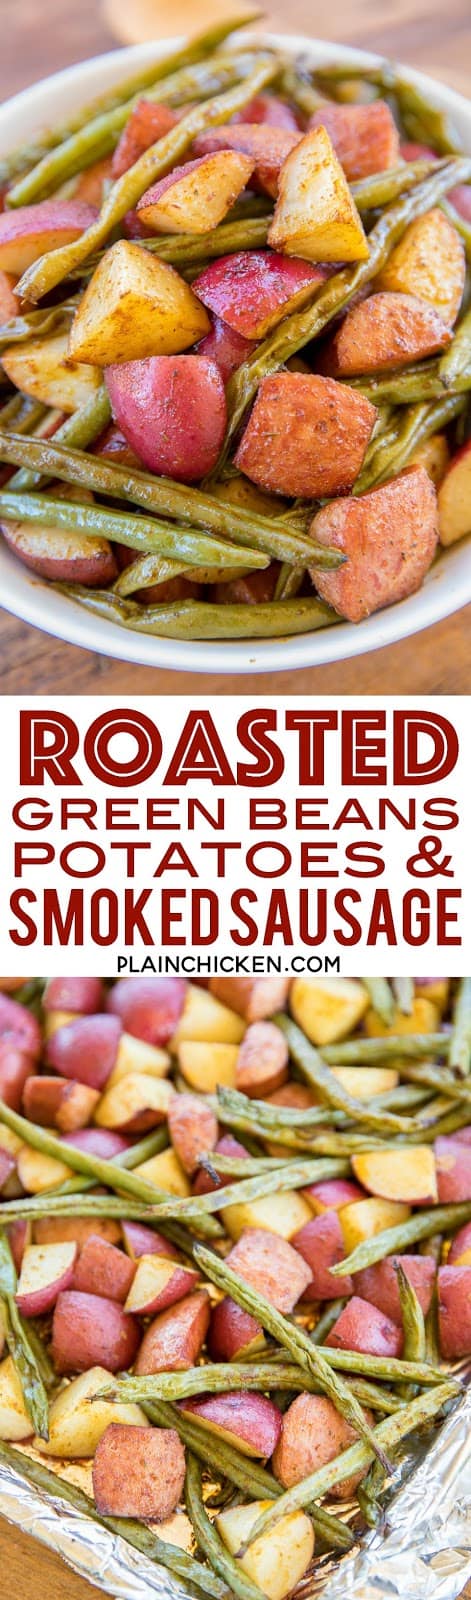 Roasted Green Beans, Potatoes and Smoked Sausage - easy sheet pan meal! Can be a main dish or side dish. SO easy! Only 5 ingredients and ready in 40 minutes!! Red potatoes, green beans, and smoked sausage tossed in olive oil and cajun seasoning. Great weeknight meal! #sheetpanmeal #sidedish #veggies